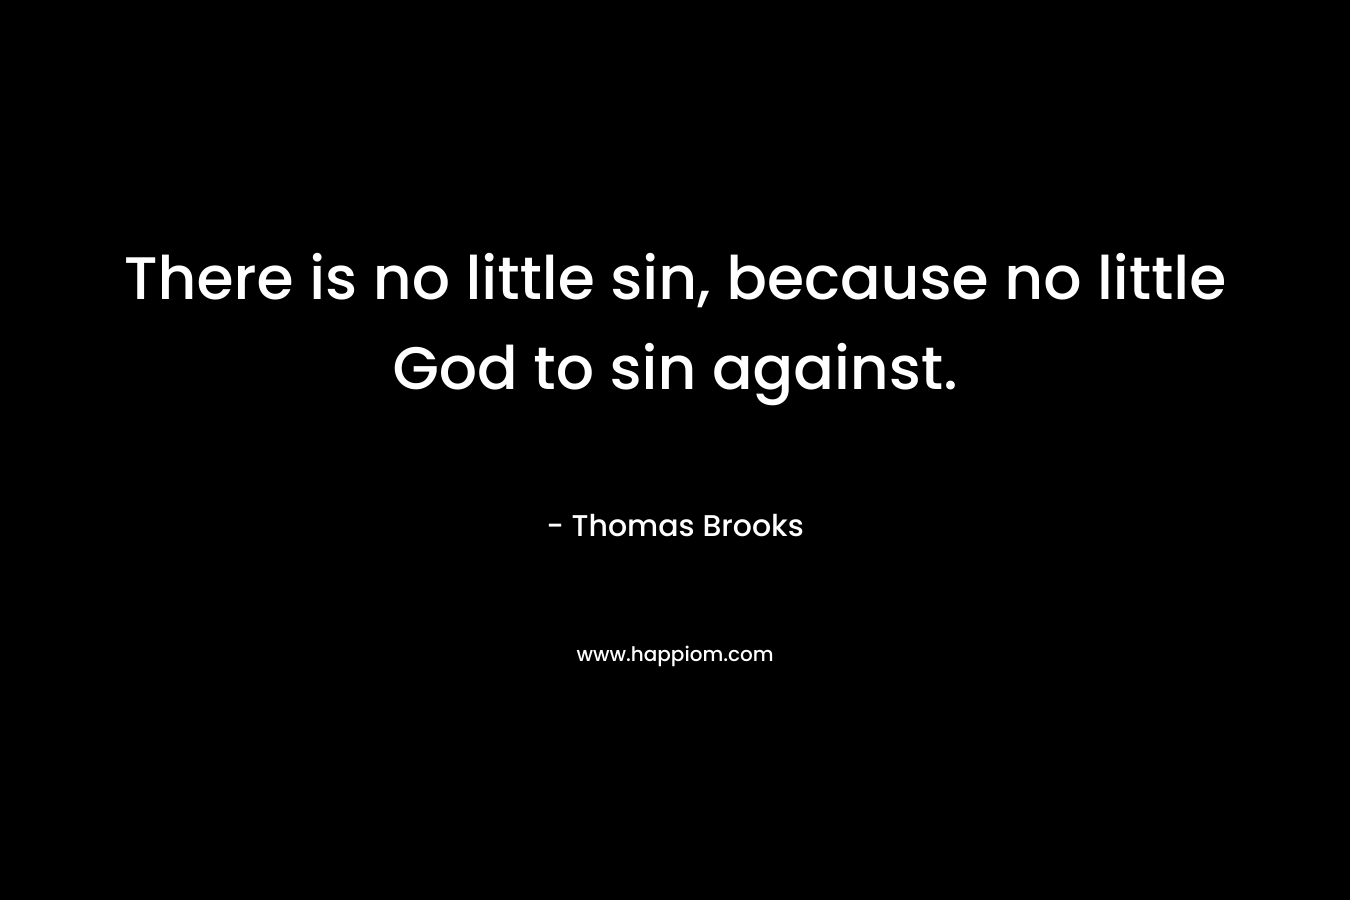 There is no little sin, because no little God to sin against.